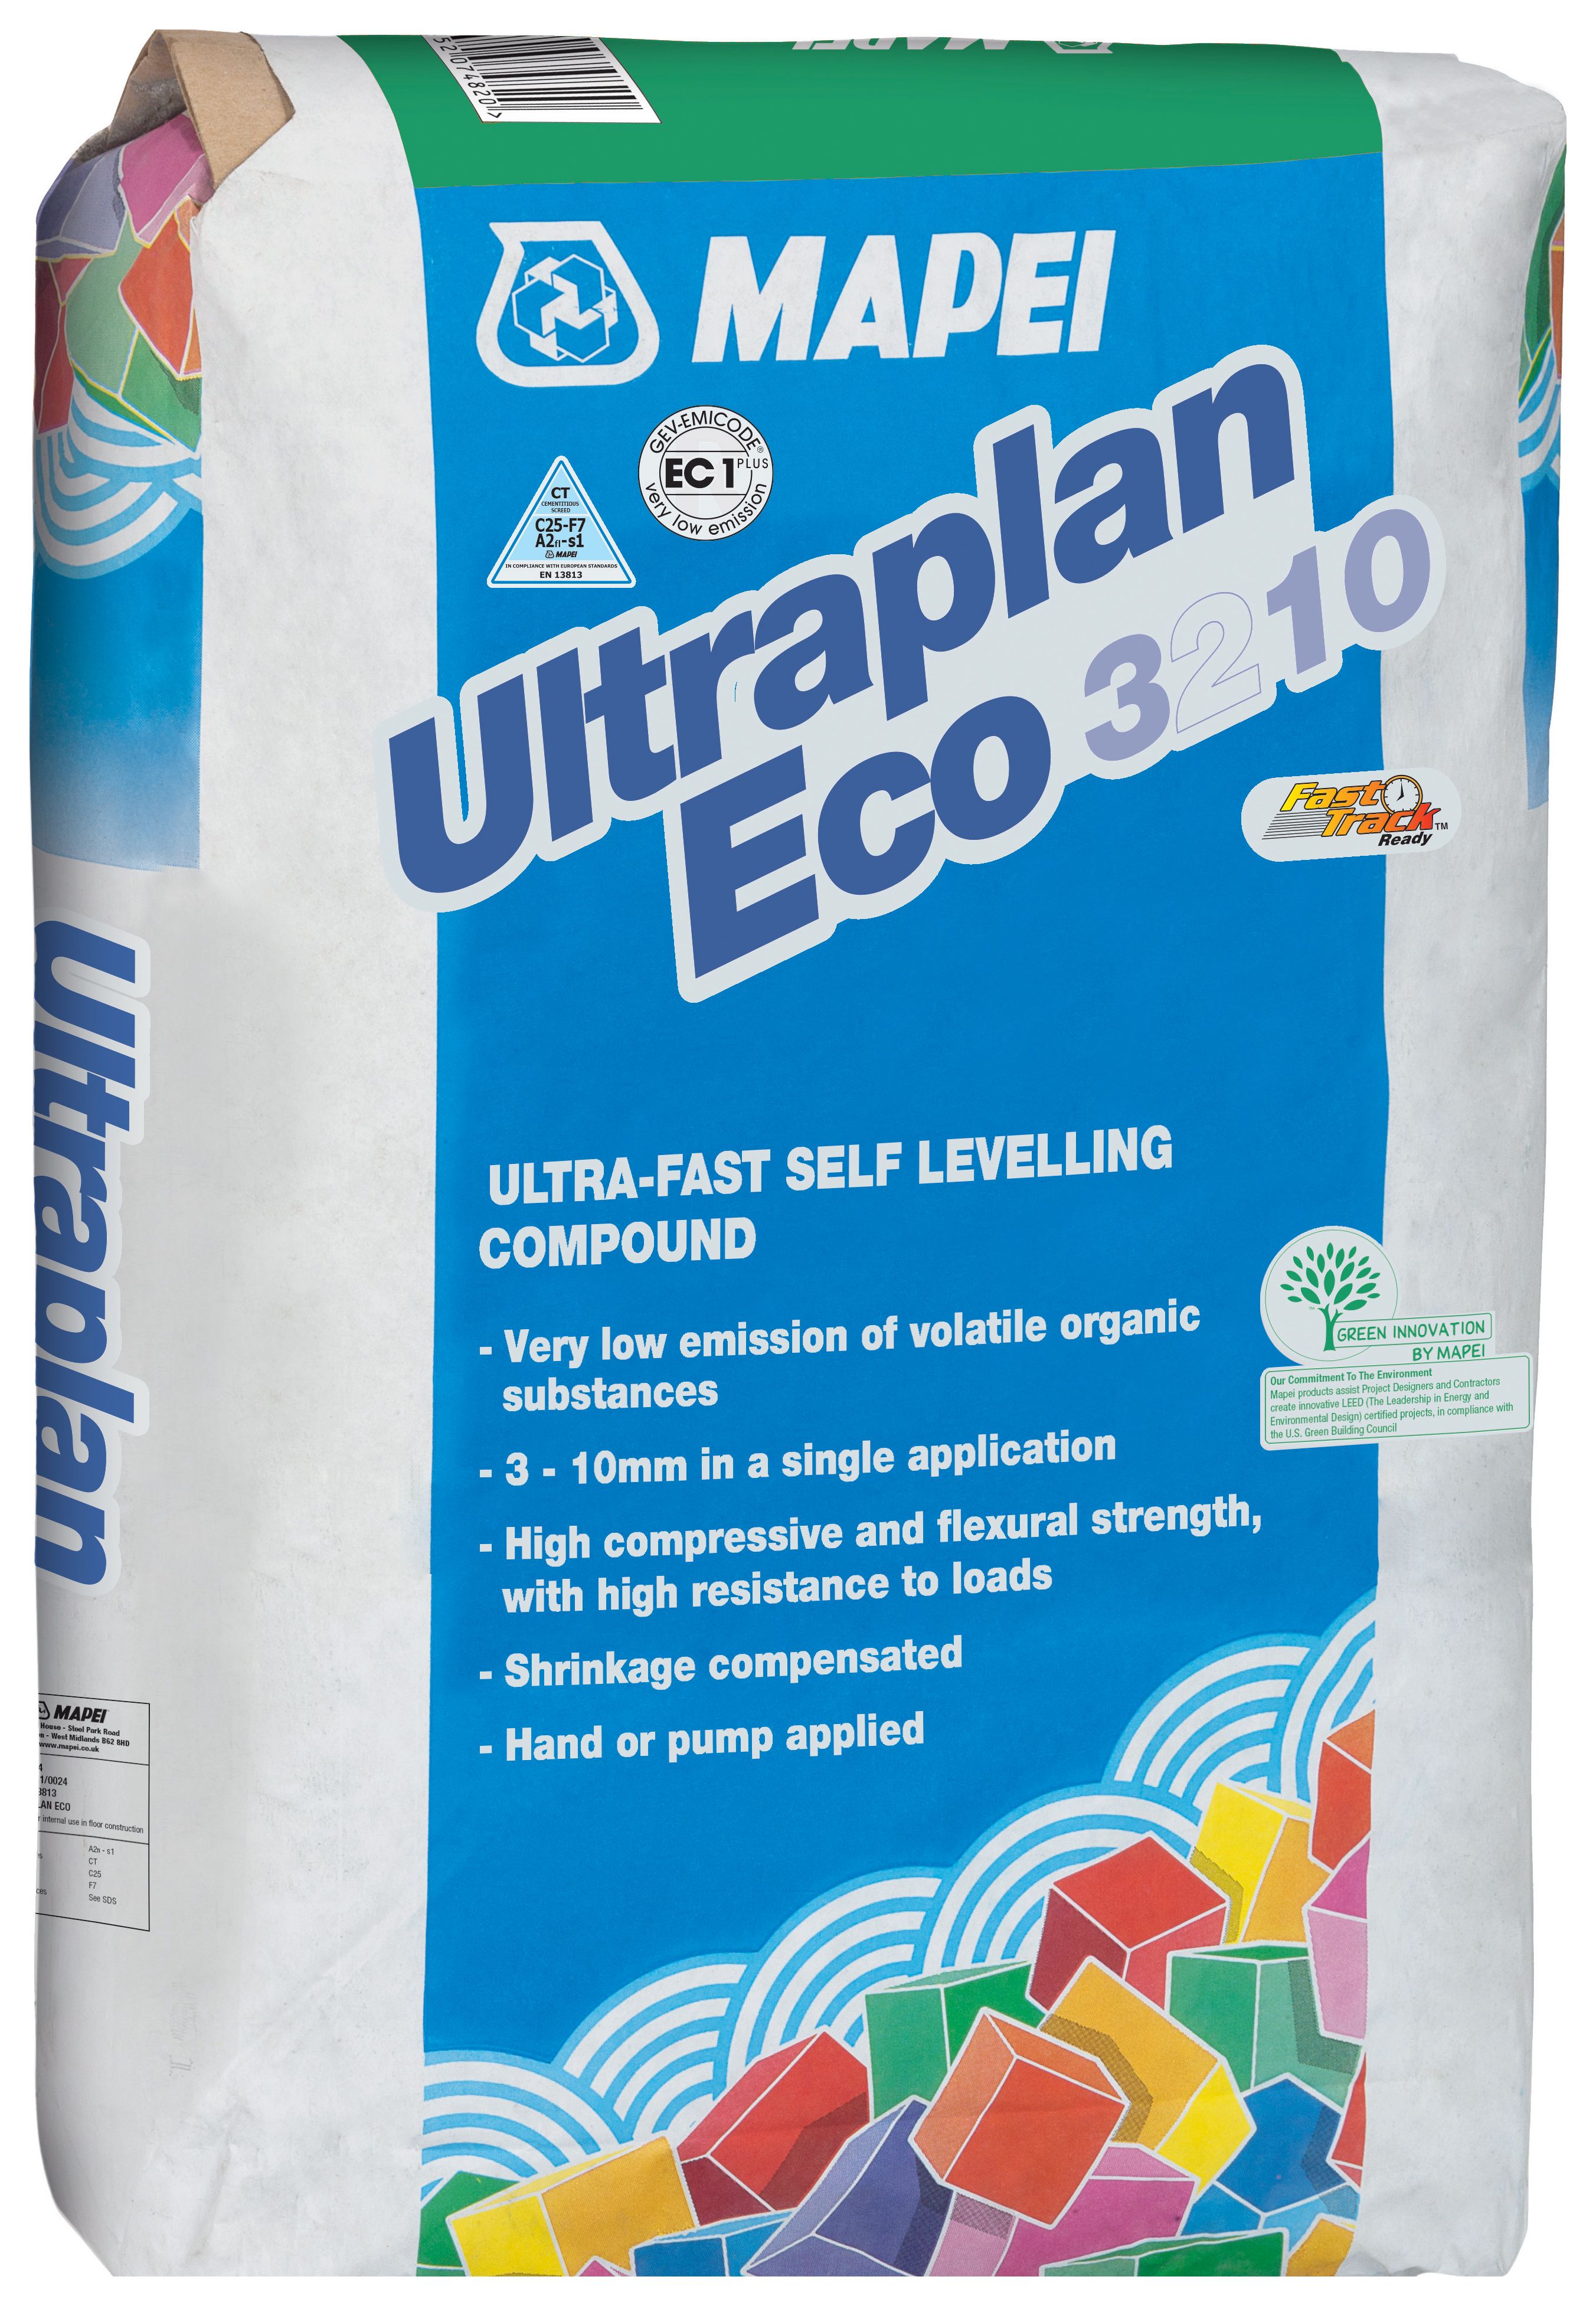 Mapei Ultraplan Eco 3210 Levelling Compound - 20kg